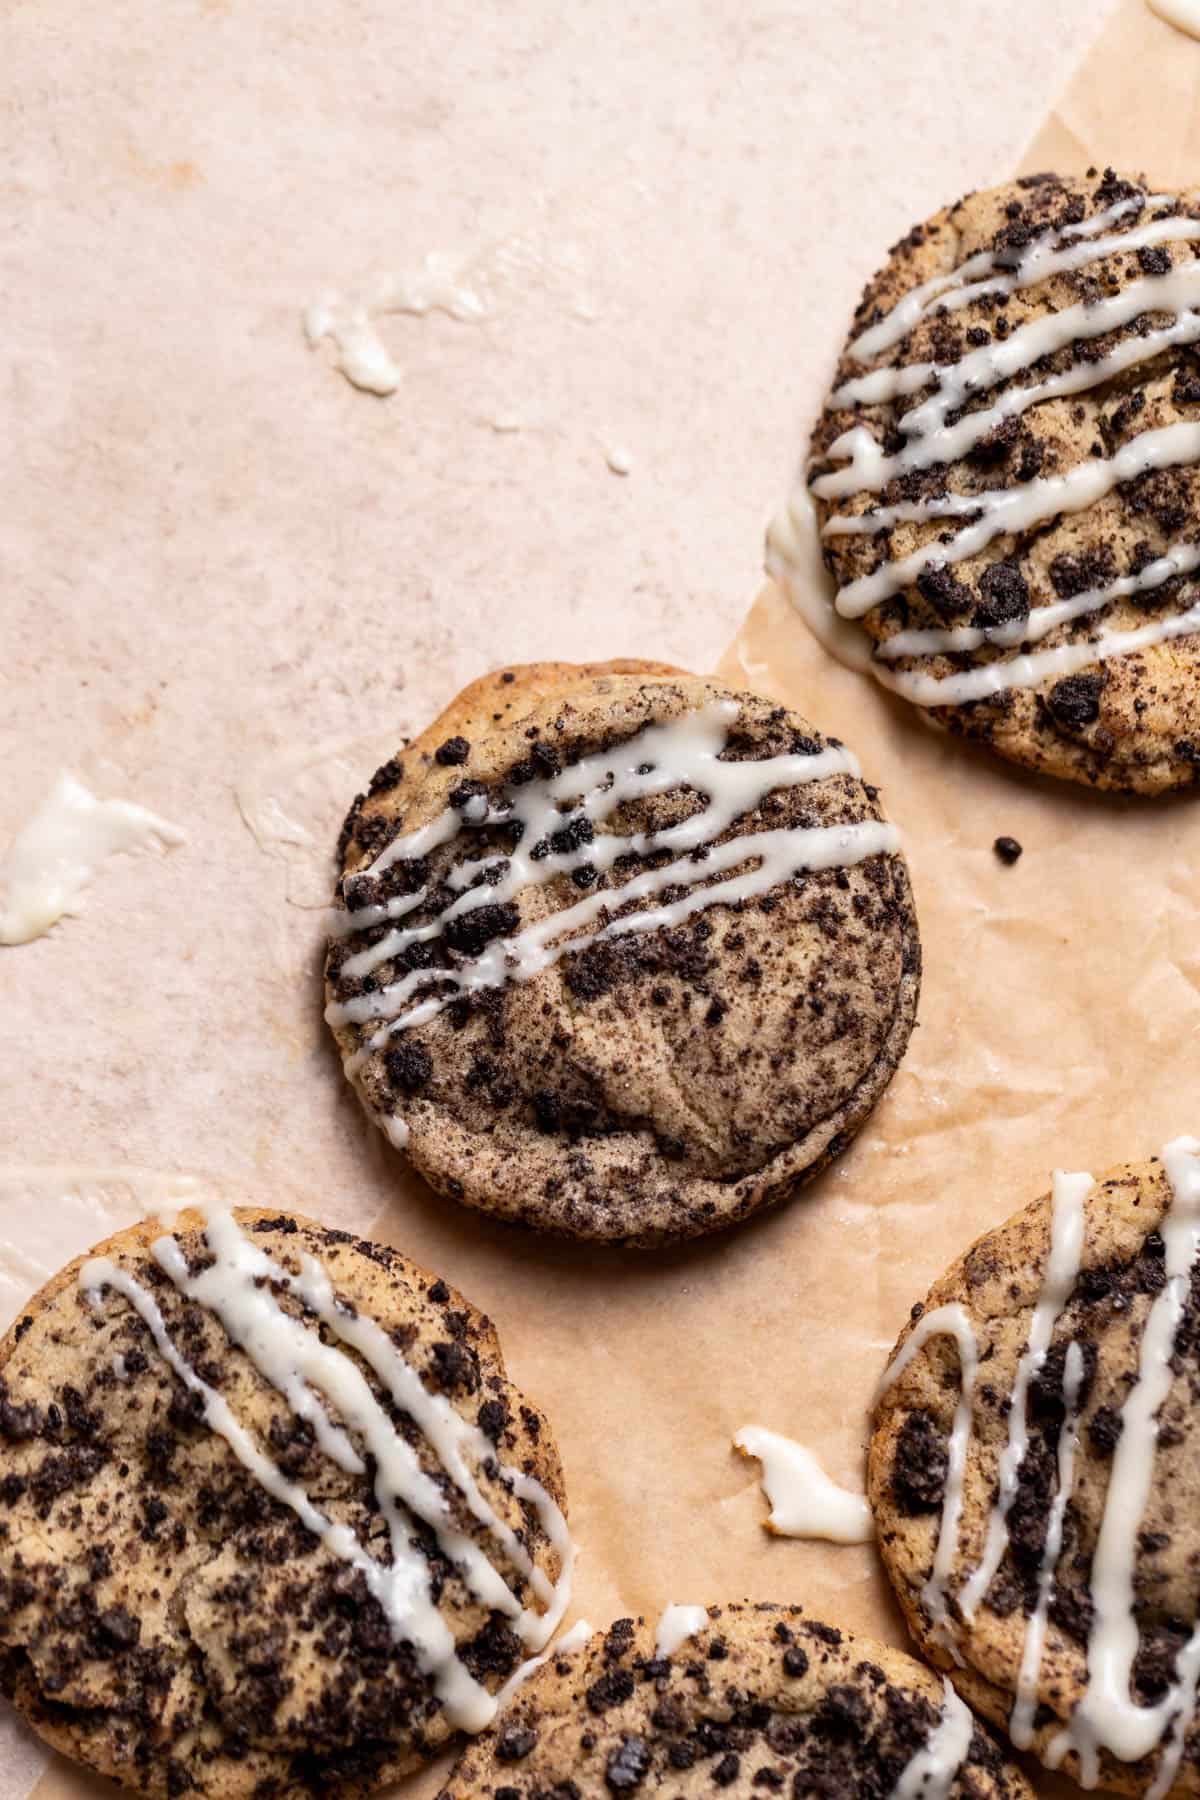 oreo cookies with cheesecake filling and glaze drizzled on top.